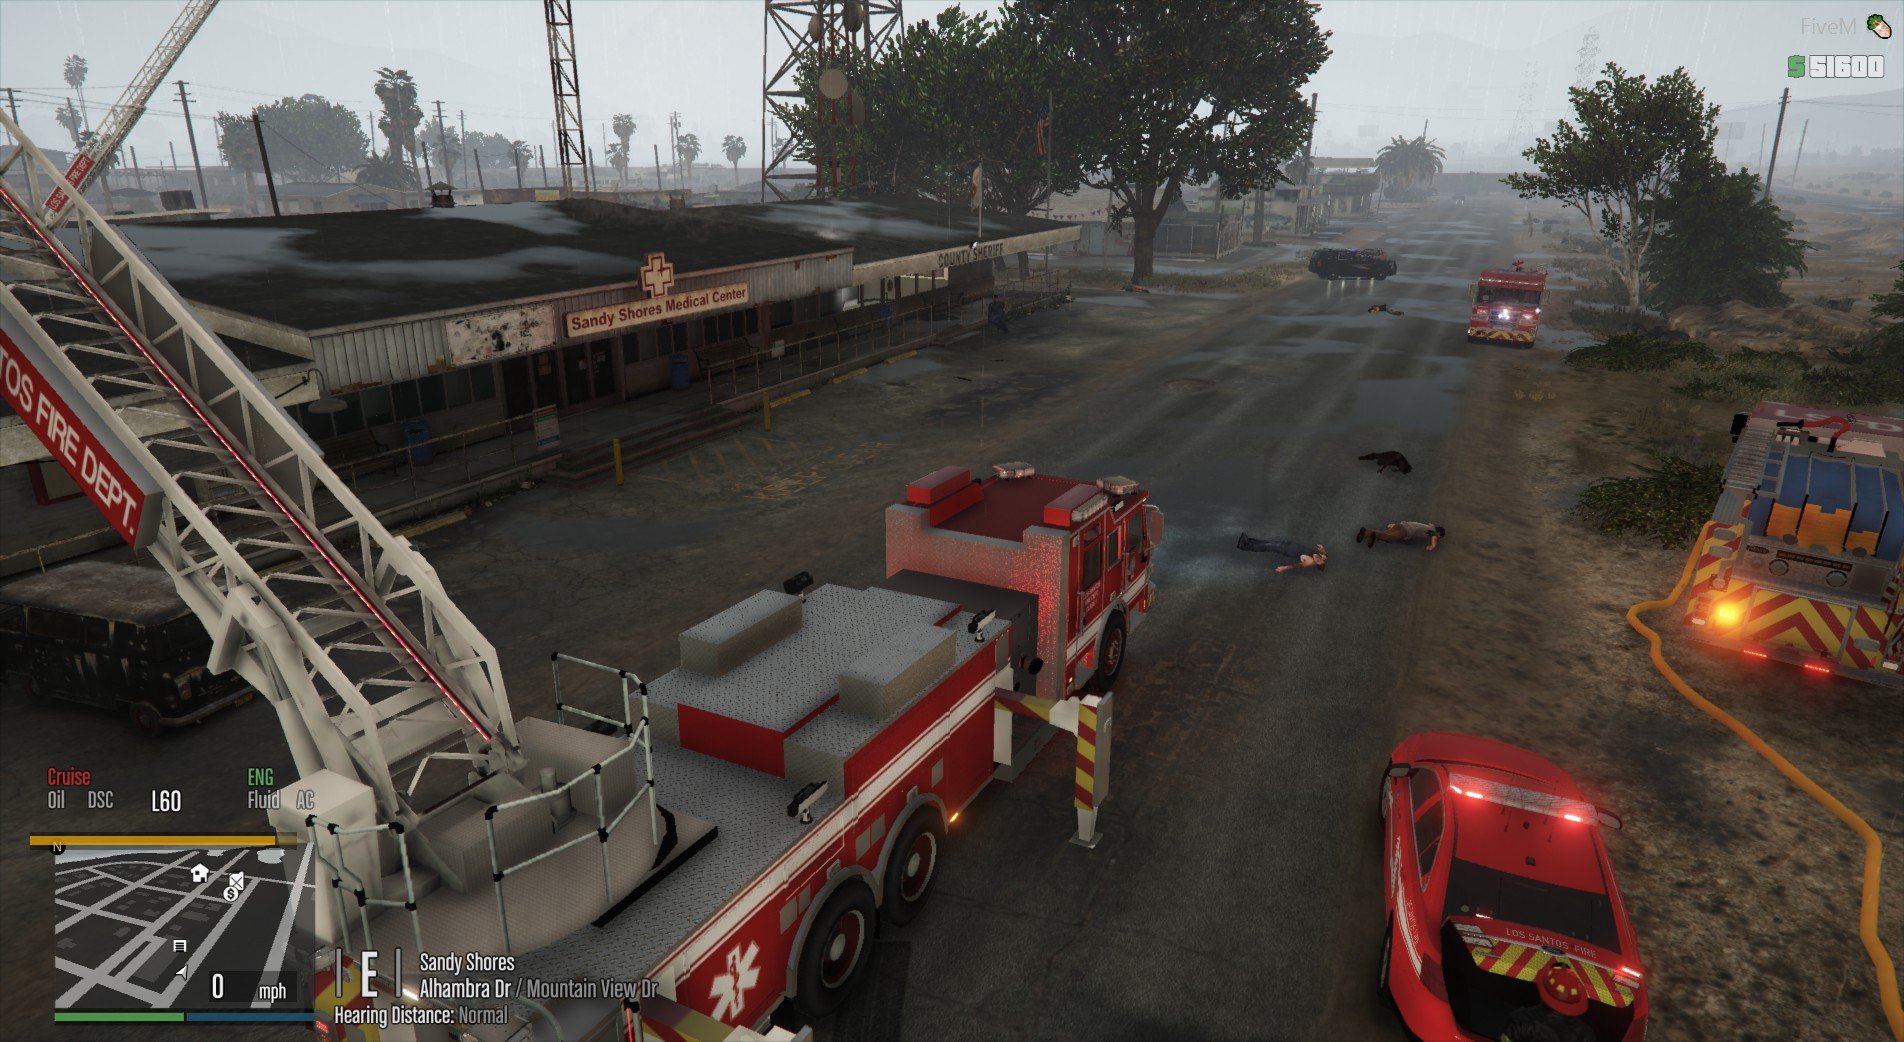 Sandy Shores Sheriff's Station Fire